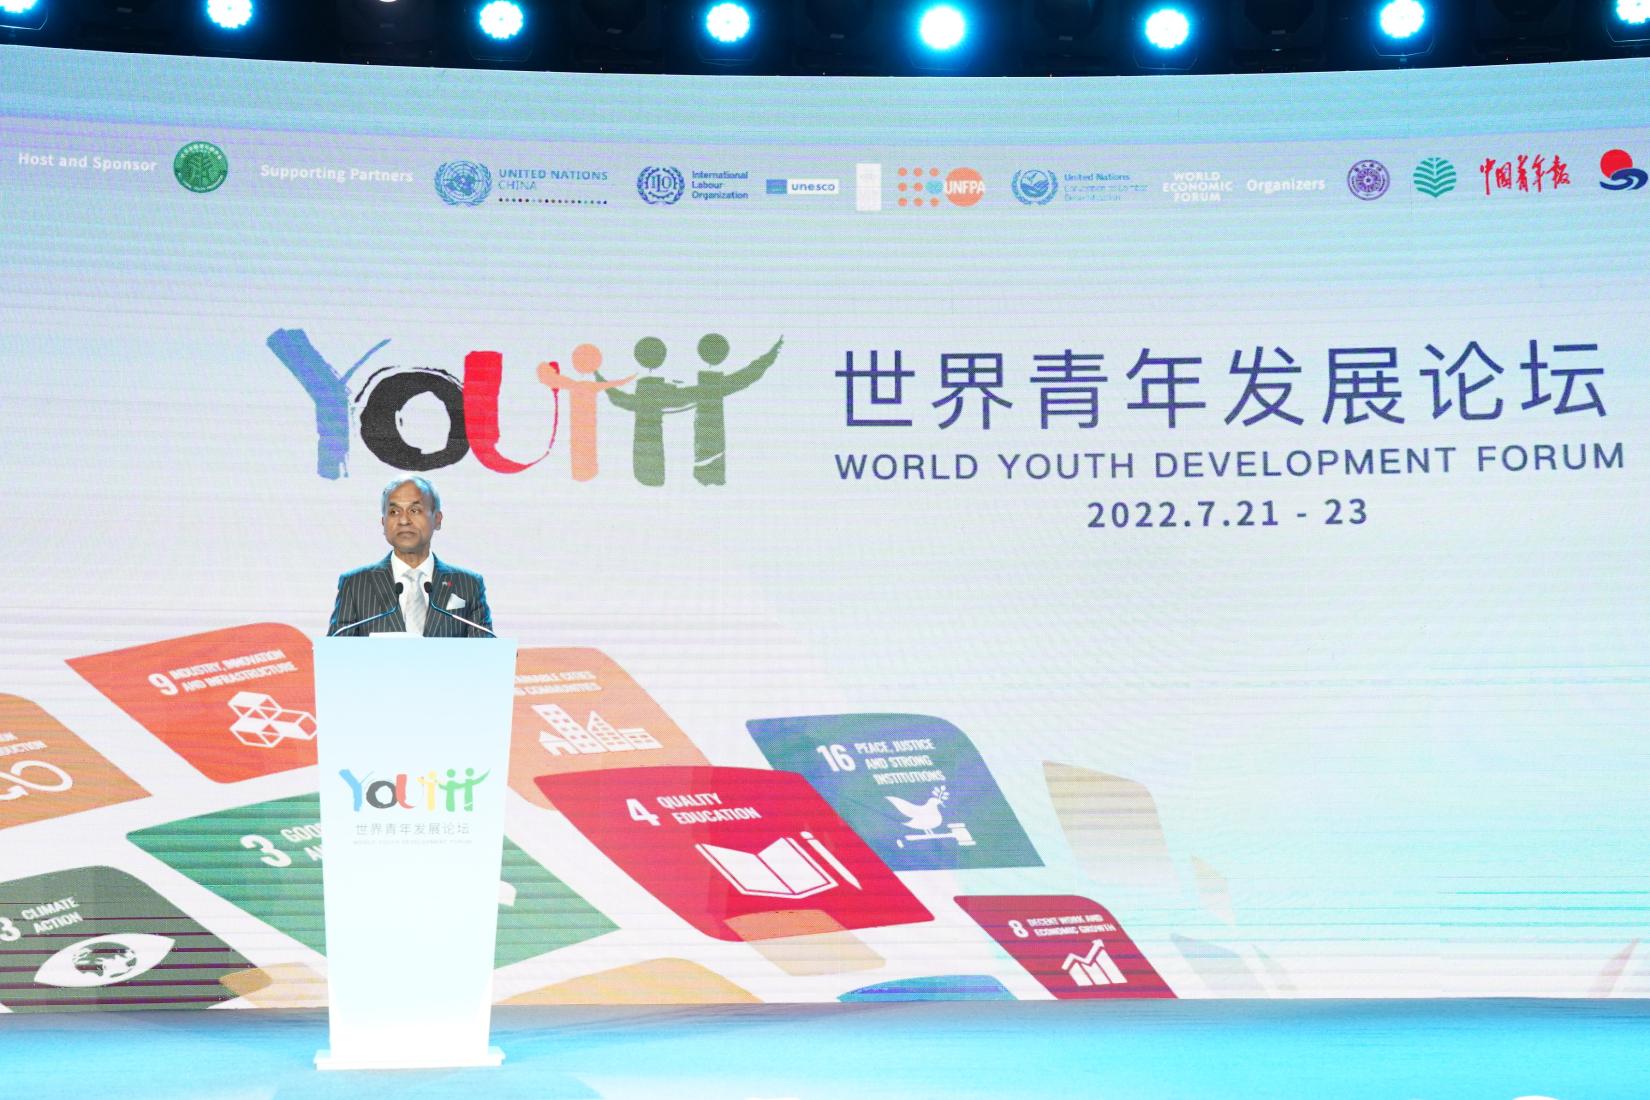 Siddharth Chatterjee, UN Resident Coordinator in China